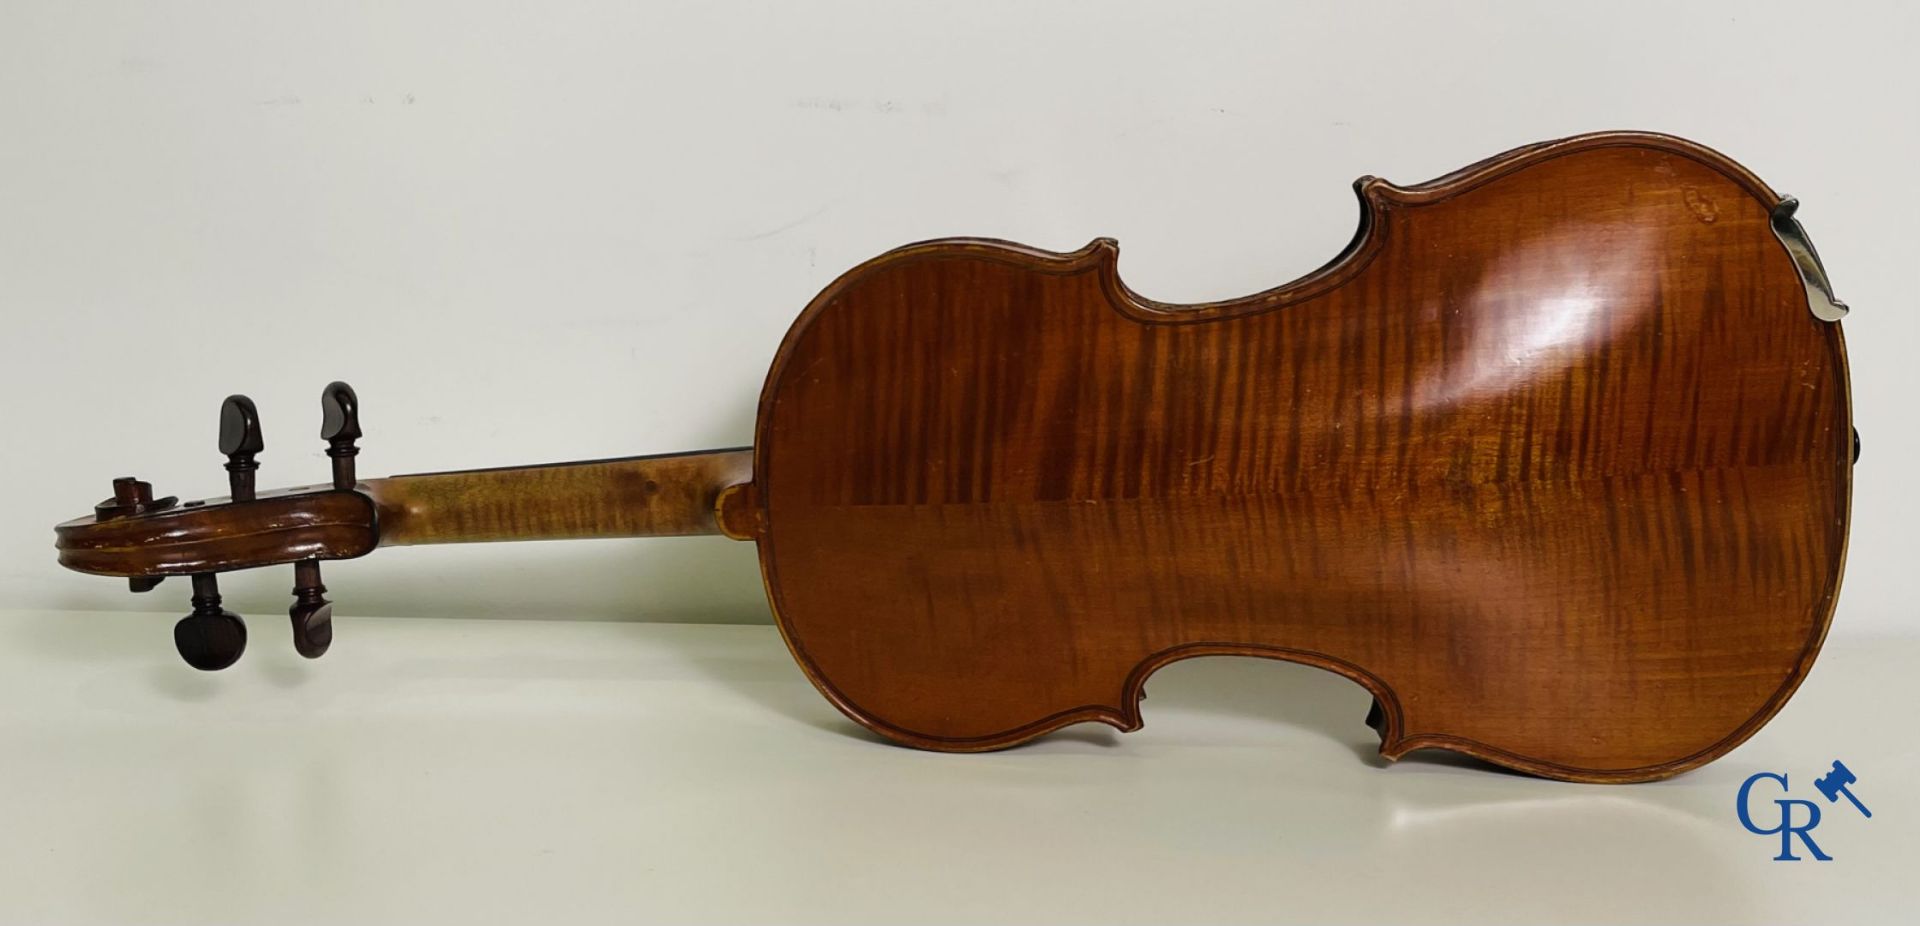 Violin in box with 2 bows. Label Lutherie Artistique M. Couturieux. 357 mm. - Image 2 of 5